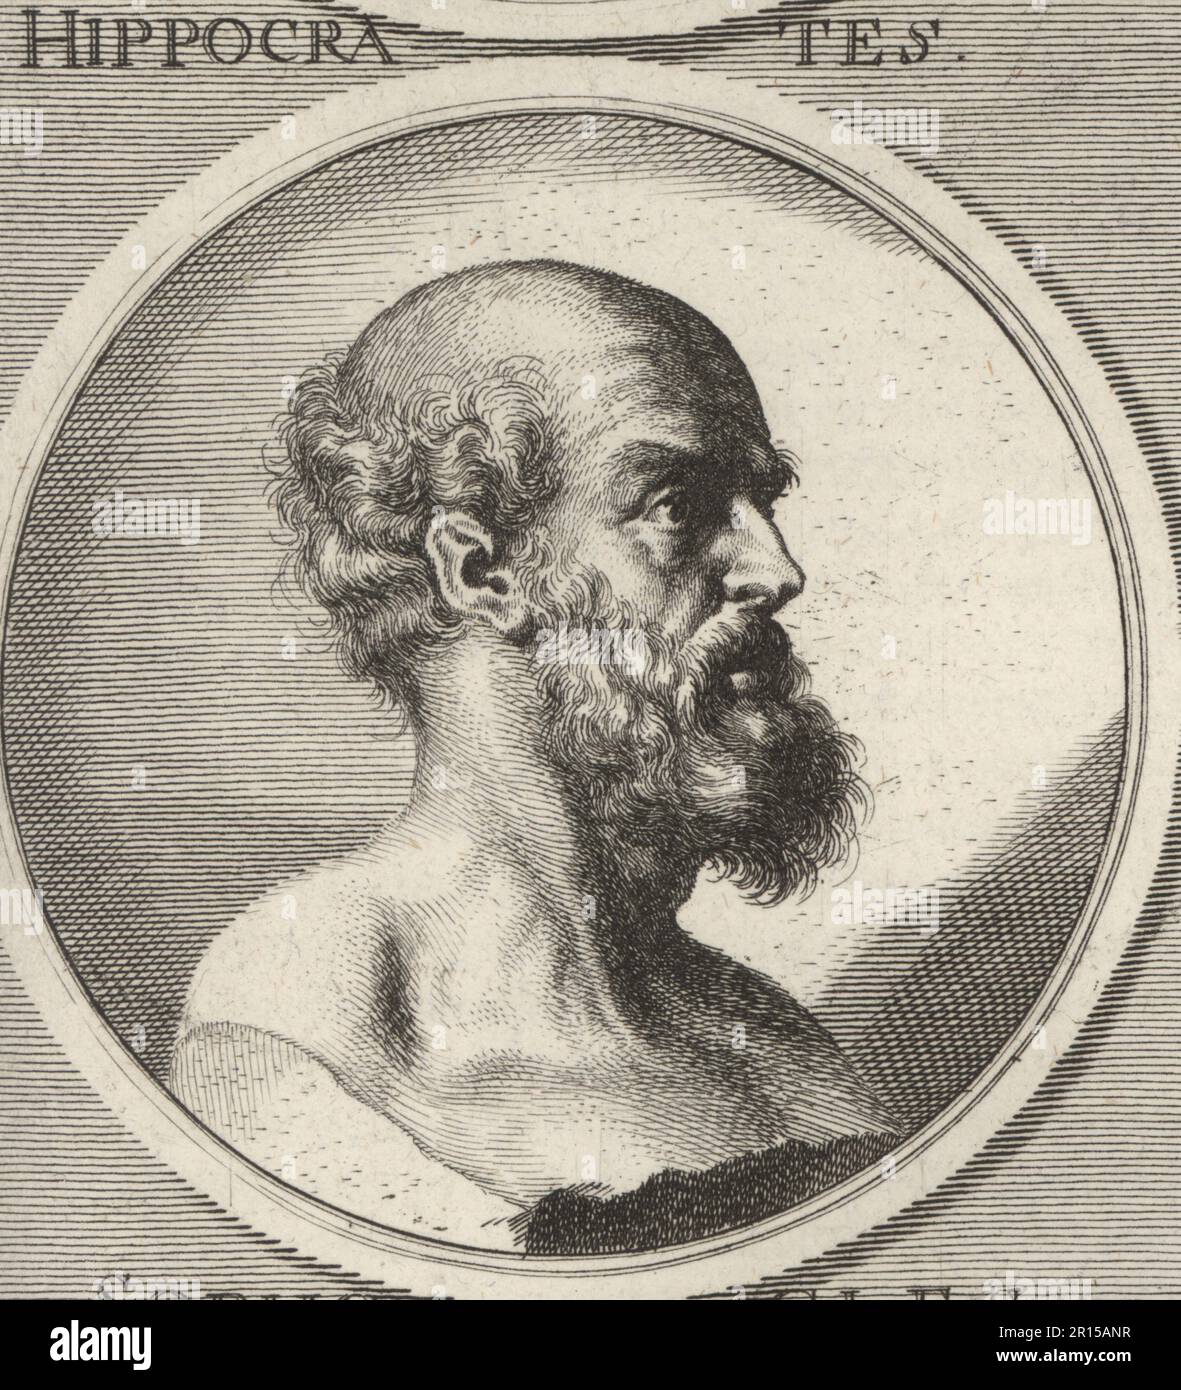 Hippocrates of Kos, also known as Hippocrates II, Greek physician of the classical period who is considered one of the most outstanding figures in the history of medicine, c.460-370 BC. Hippocrates. Copperplate engraving by Bartholomaus Kilian after an illustration by Joachim von Sandrart from his L’Academia Todesca, della Architectura, Scultura & Pittura, oder Teutsche Academie, der Edlen Bau- Bild- und Mahlerey-Kunste, German Academy of Architecture, Sculpture and Painting, Jacob von Sandrart, Nuremberg, 1675. Stock Photo